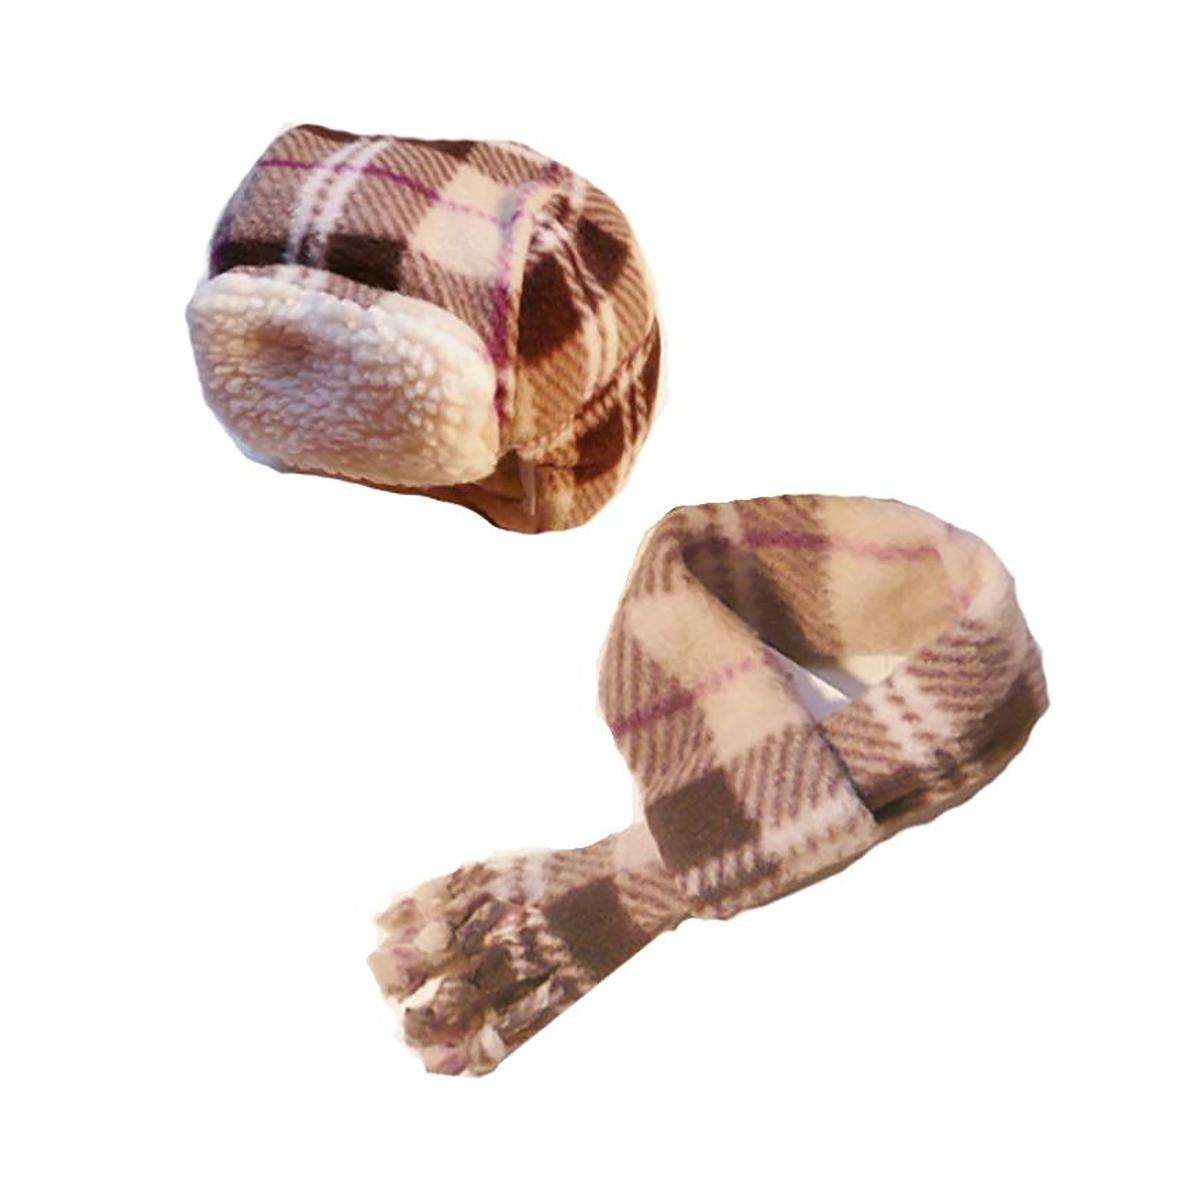 My Canine Kids Aviator Hat and Scarf Set for Dogs - Tan Plaid